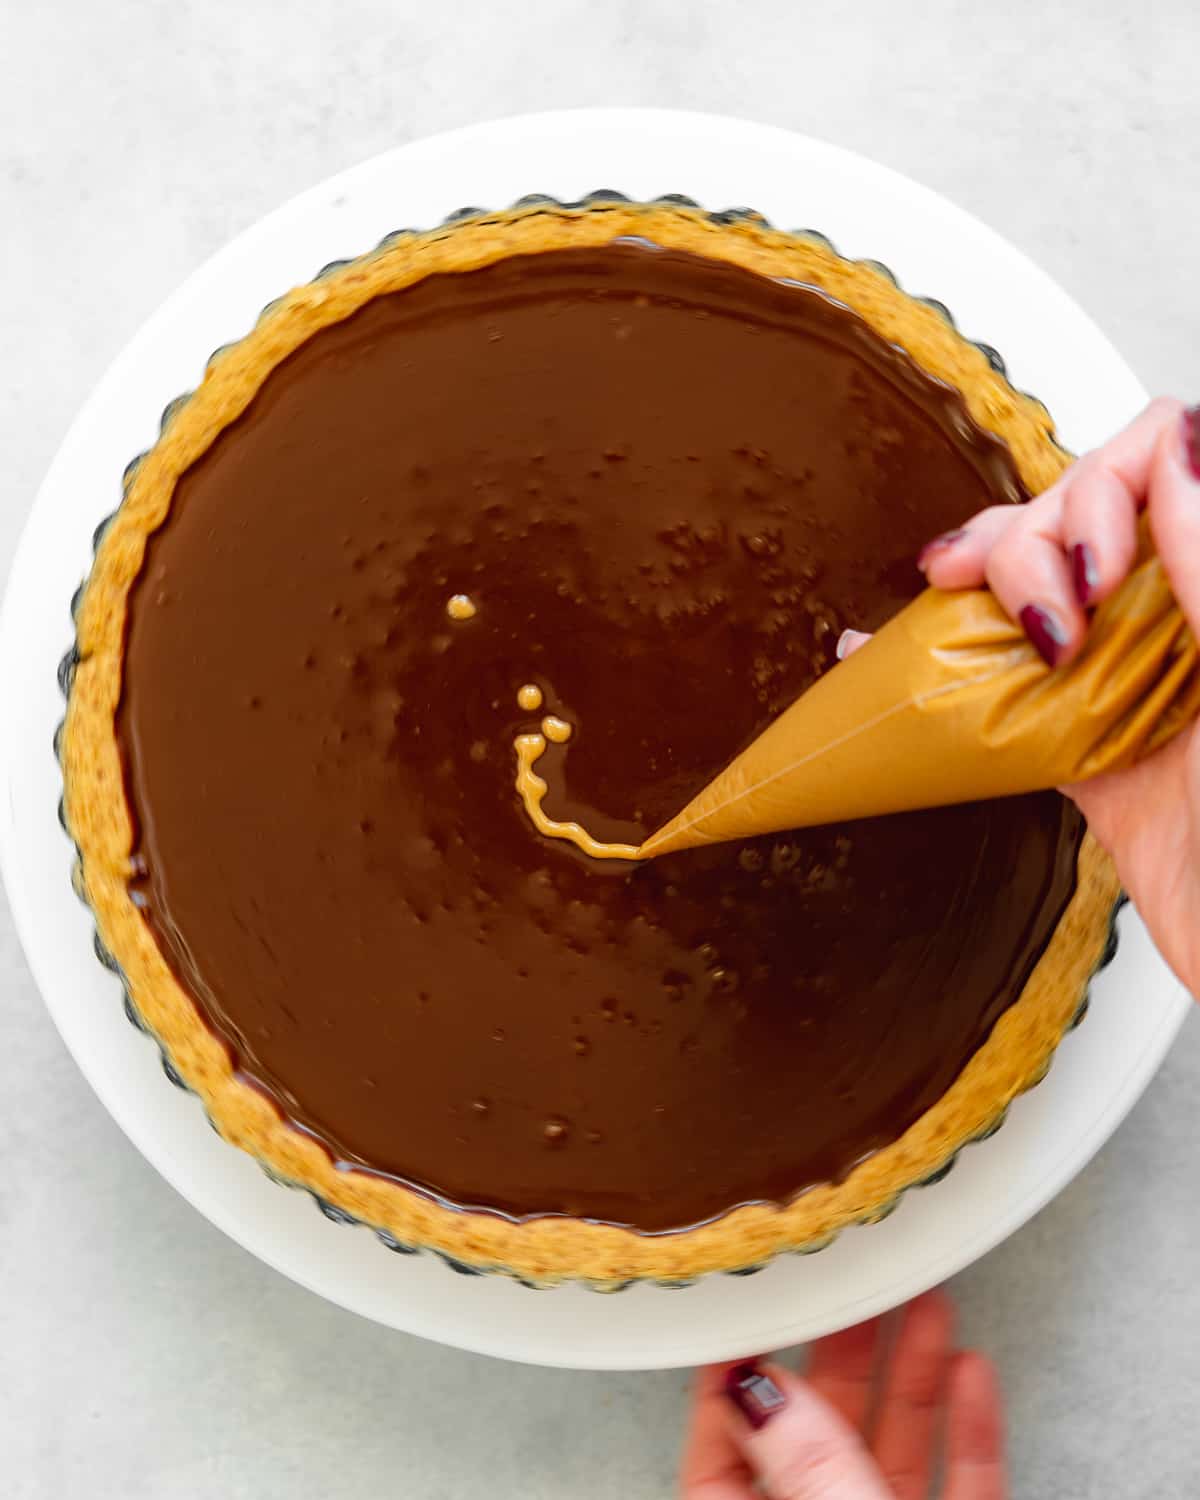 creating a swirl pattern with peanut butter on top of a chocolate tart using a skewer.